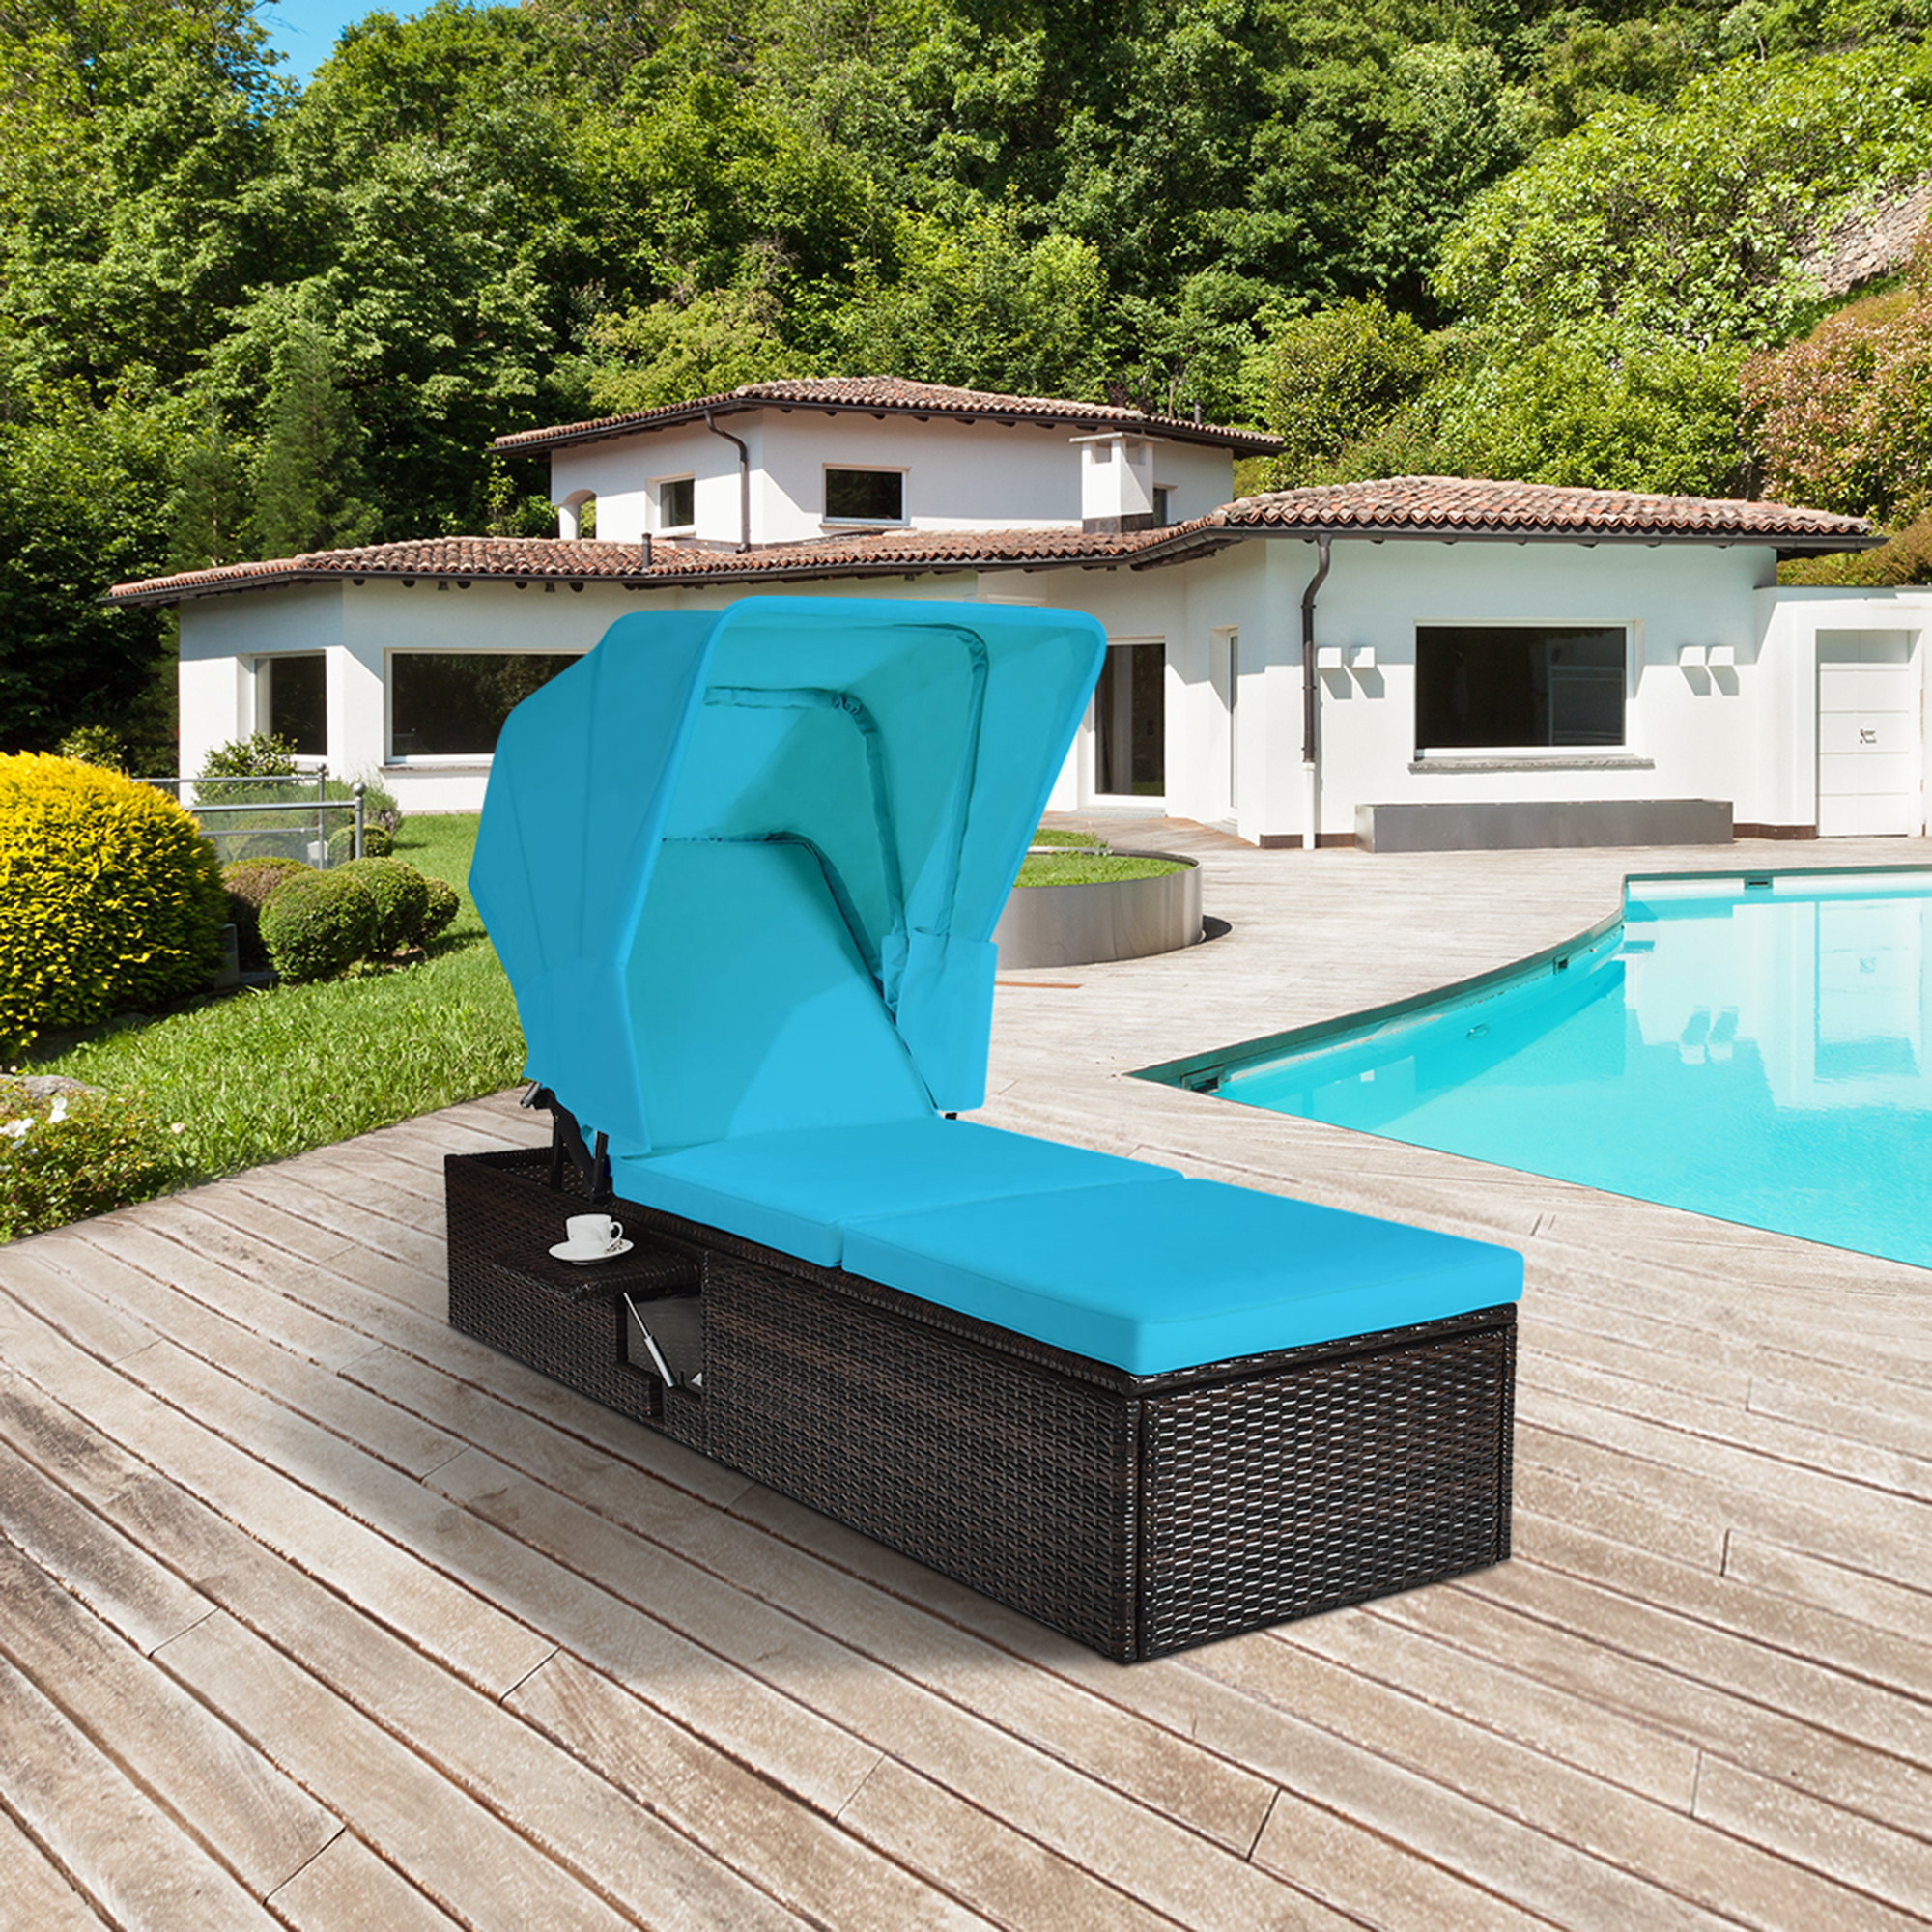 Gymax 2PCS Rattan Patio Chaise Lounge Chair W/ Adjustable Canopy Turquoise Cushion - image 4 of 10